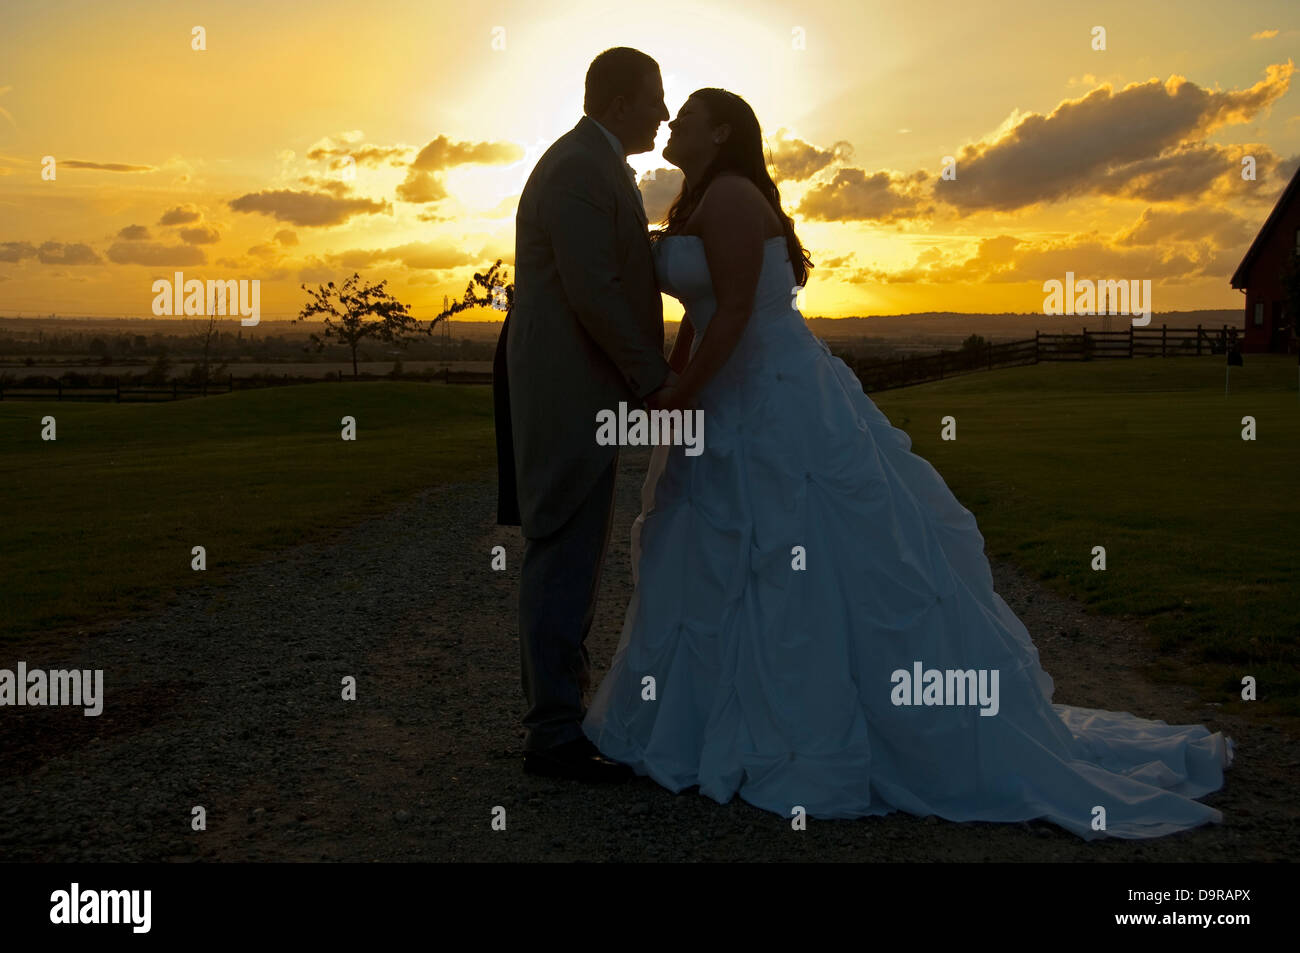 Horizontal close up portrait of a bride and groom holding hands together infront of a romantic sunset on their wedding day. Stock Photo